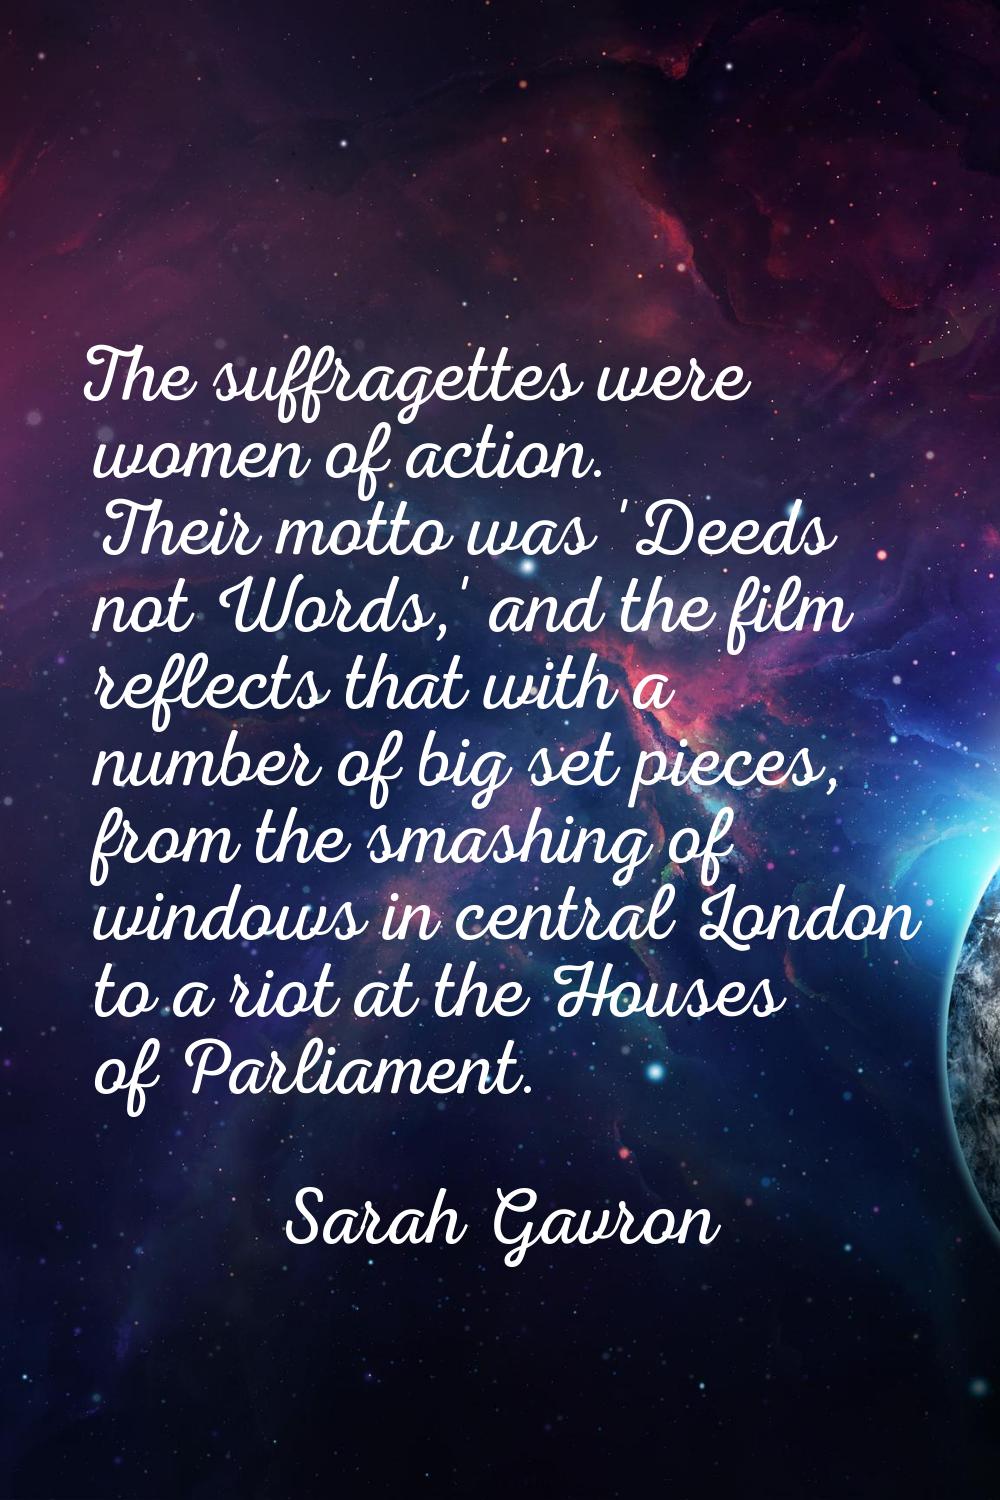 The suffragettes were women of action. Their motto was 'Deeds not Words,' and the film reflects tha